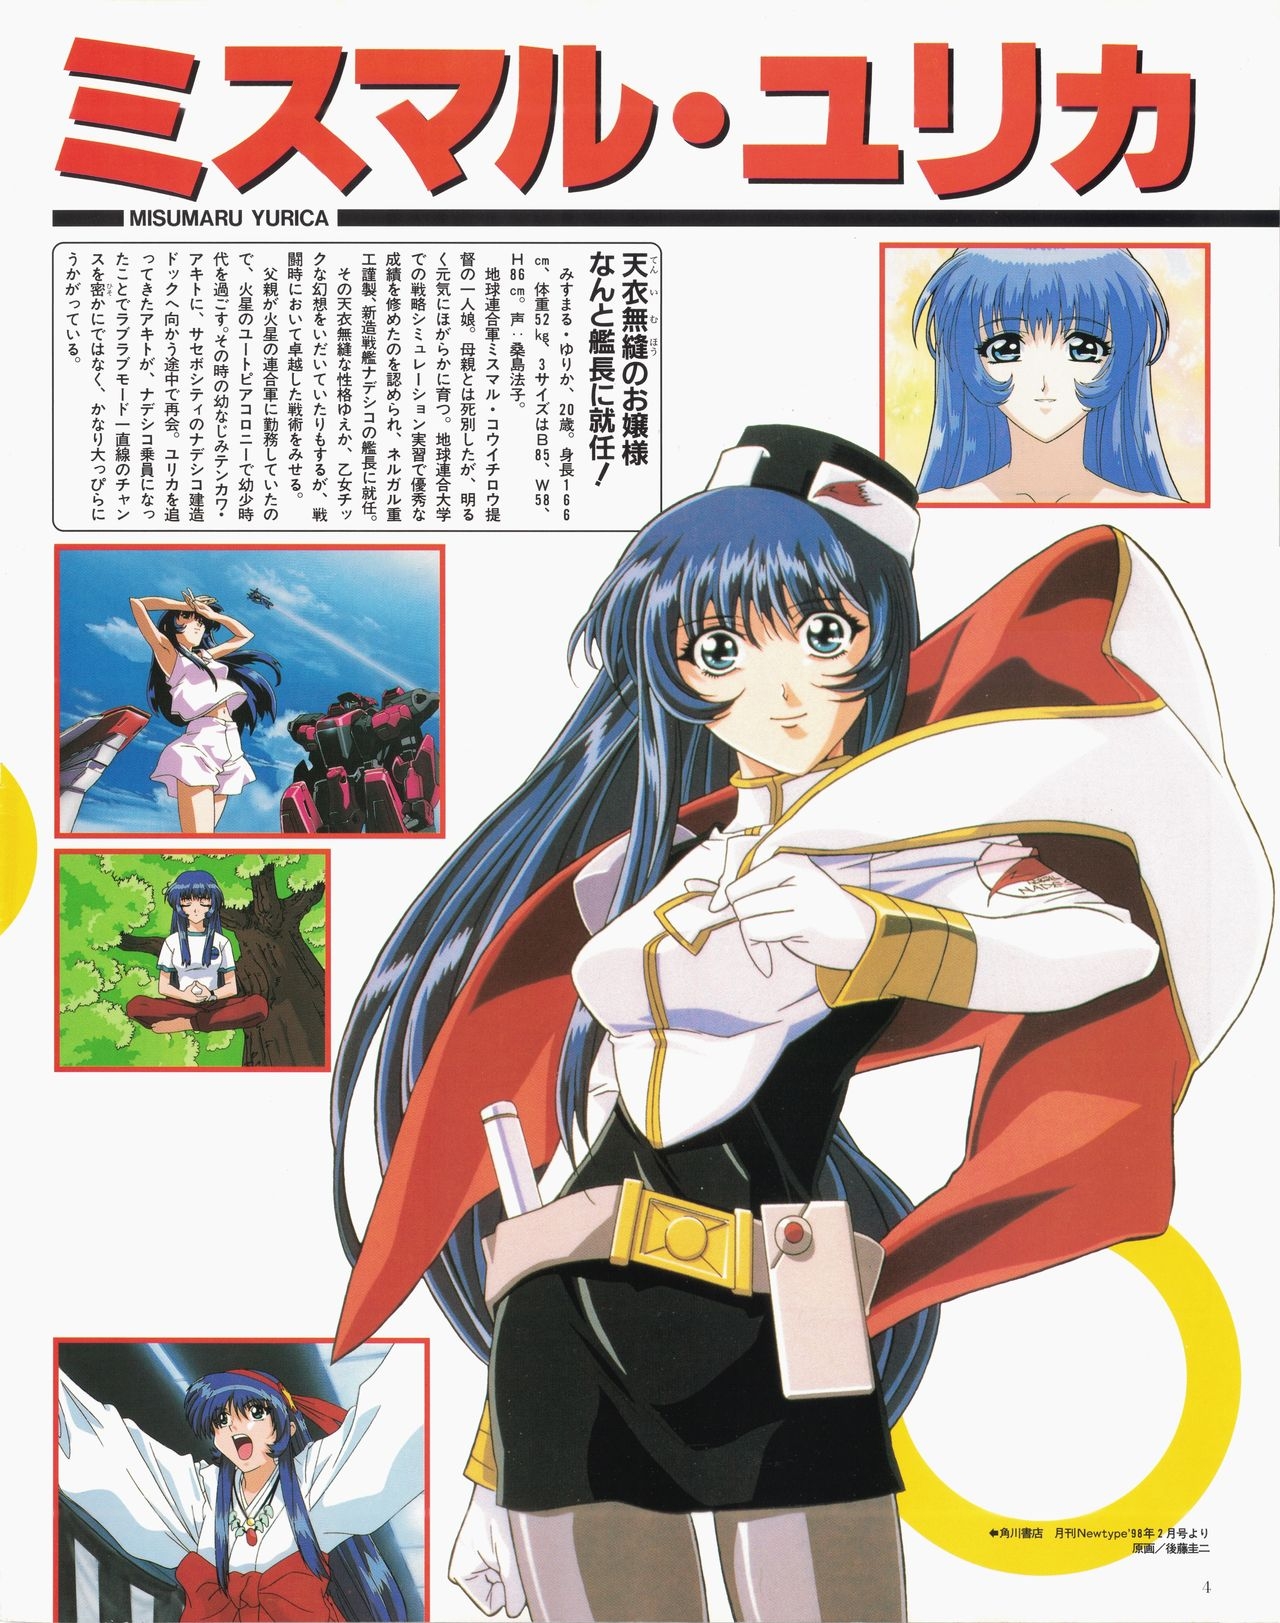 Newtype 100% Collection - Martian Successor Nadesico Perfects 6